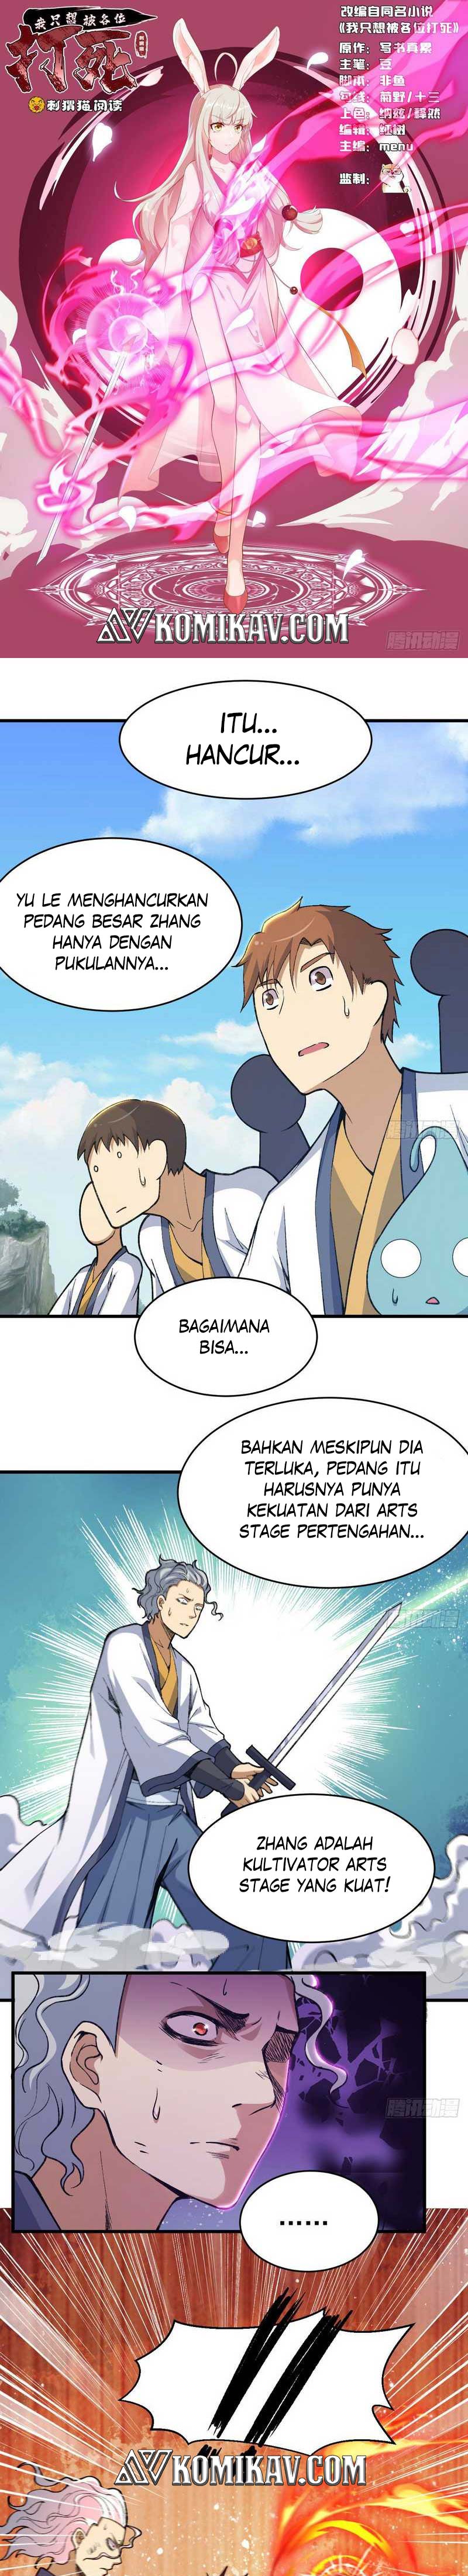 Dilarang COPAS - situs resmi www.mangacanblog.com - Komik i just want to be beaten to death by everyone 085 - chapter 85 86 Indonesia i just want to be beaten to death by everyone 085 - chapter 85 Terbaru 1|Baca Manga Komik Indonesia|Mangacan